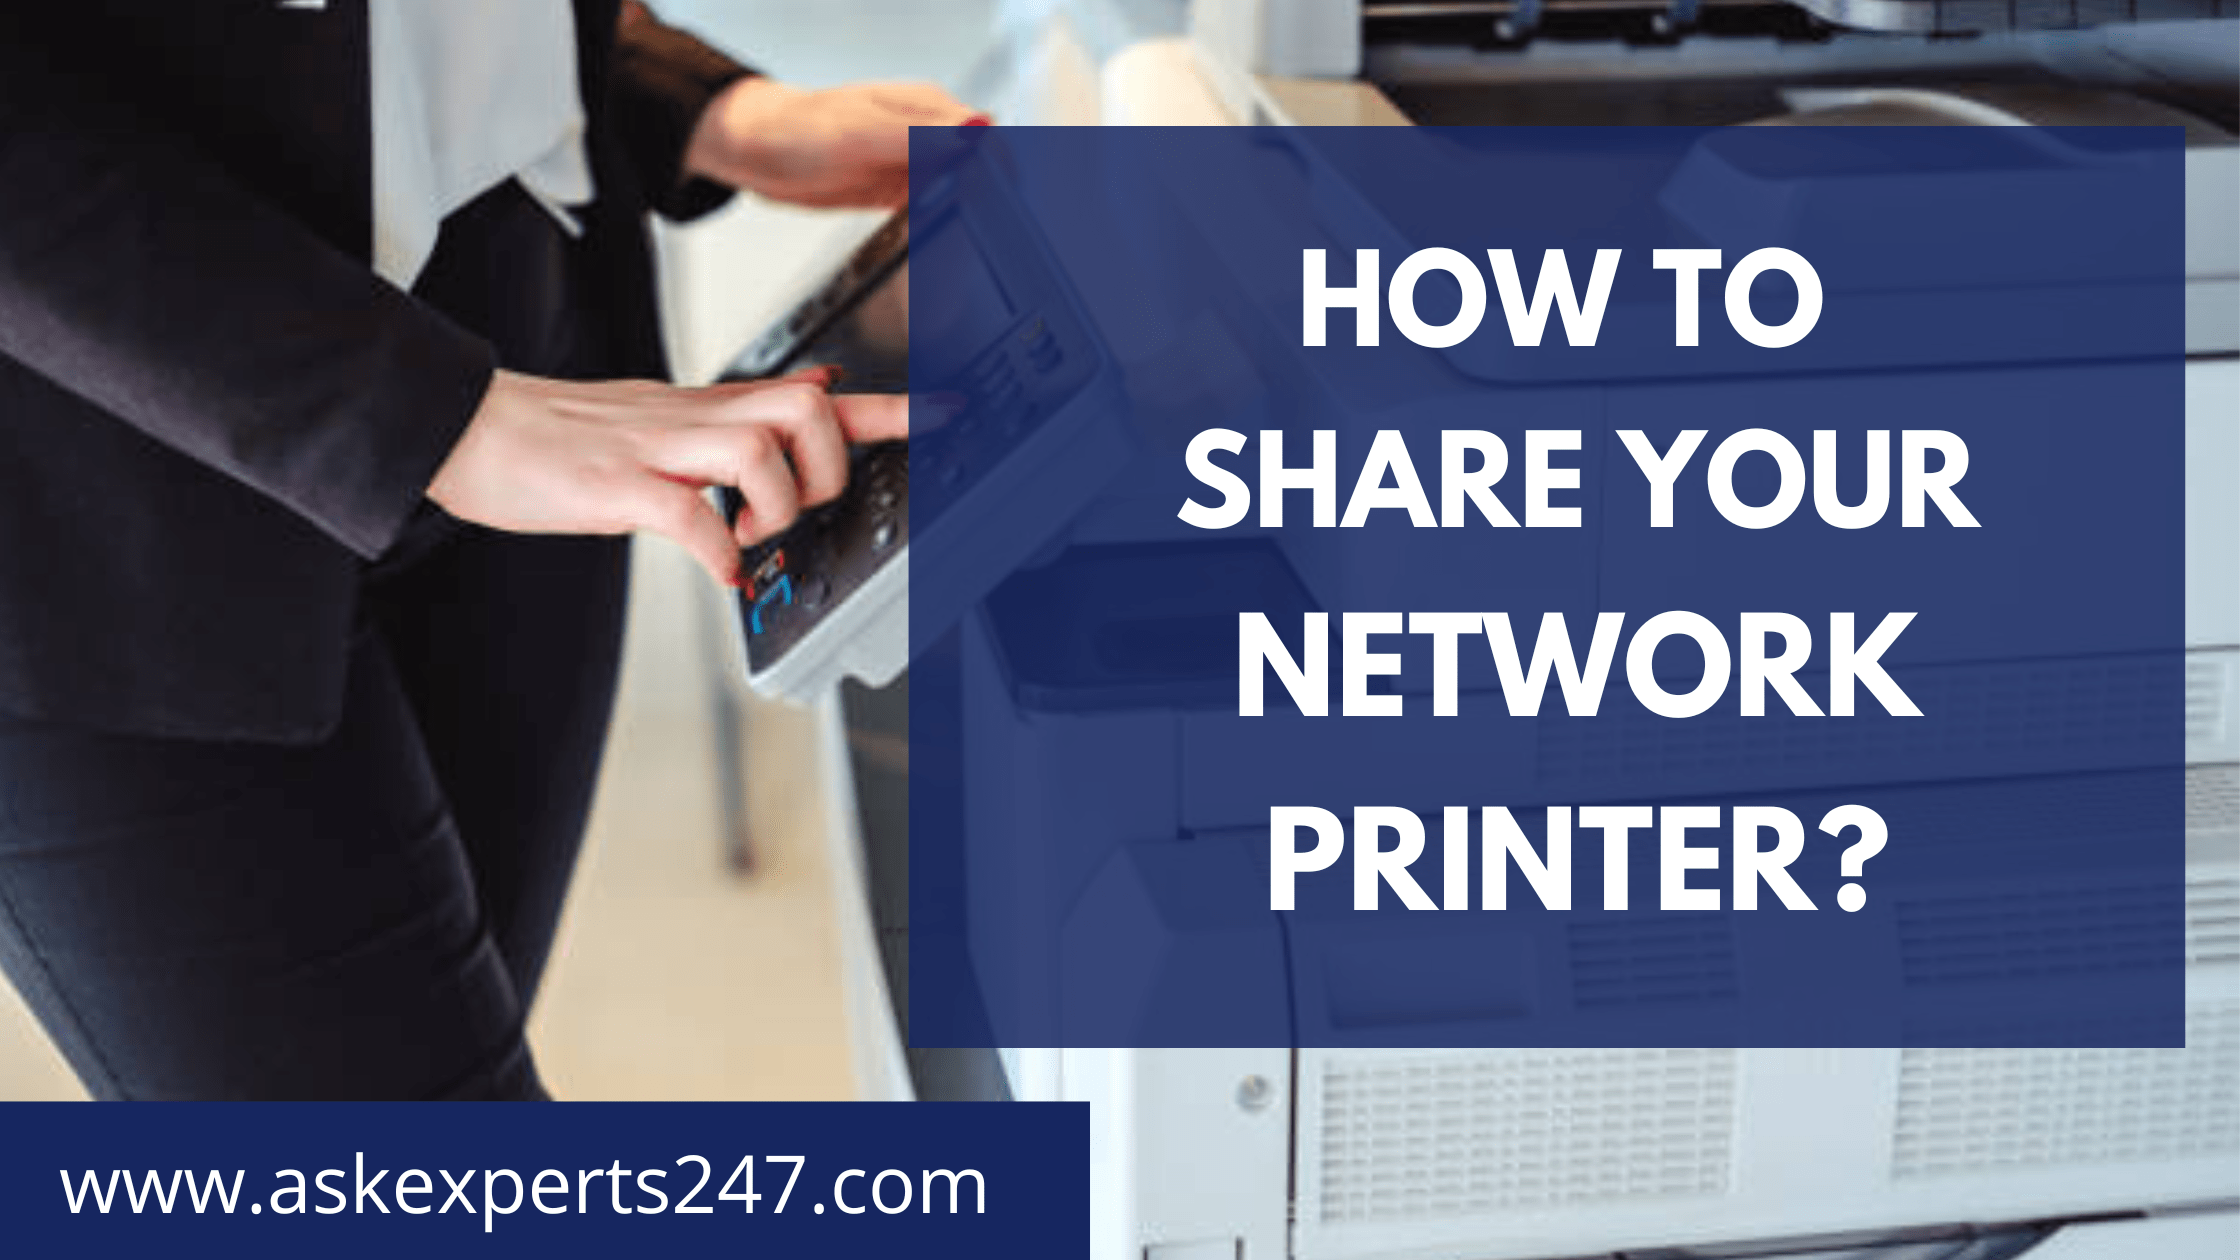 How to Share your Network Printer